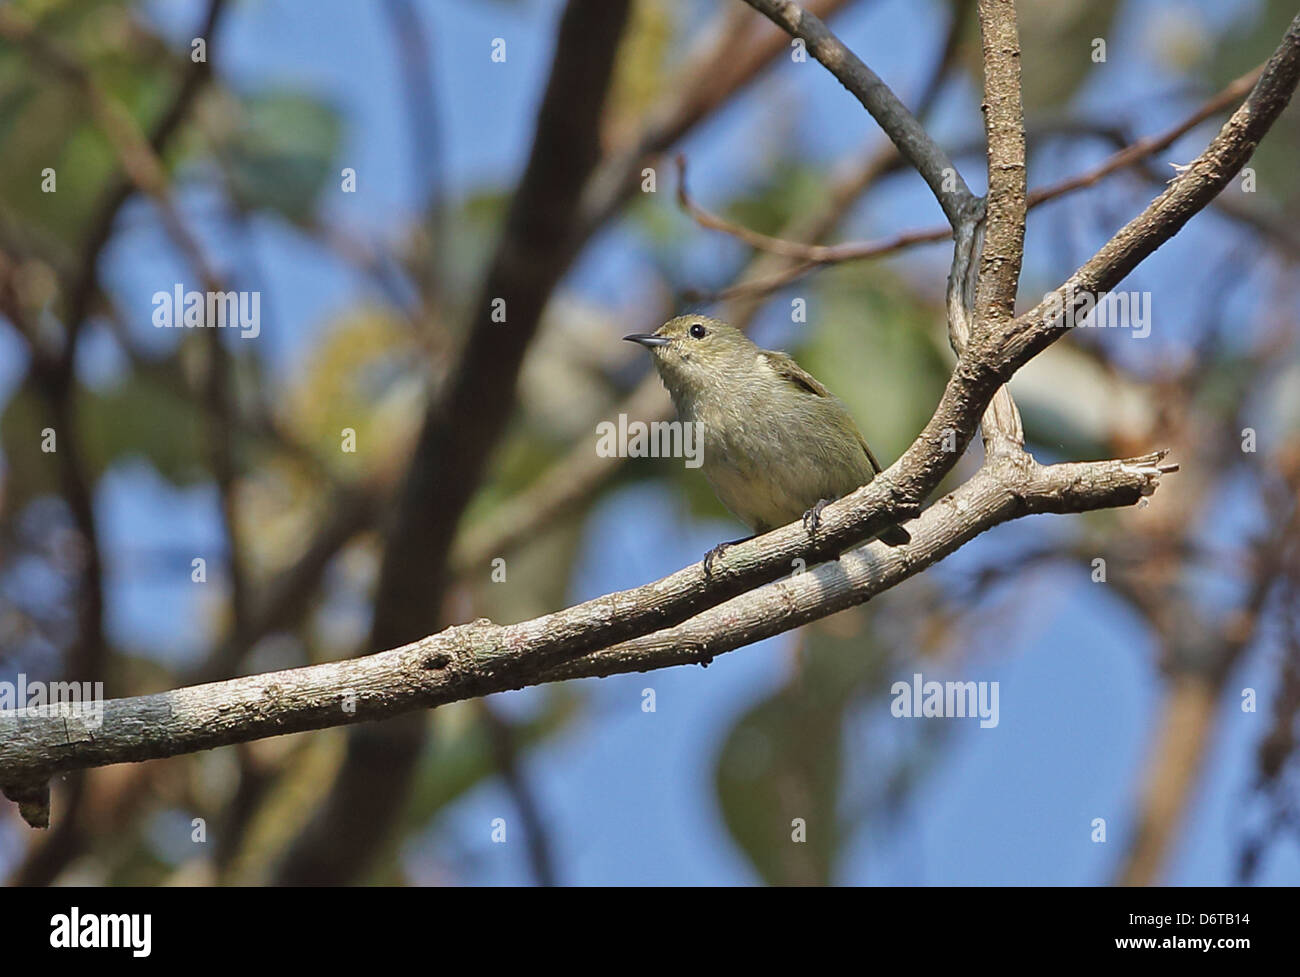 Plain Flowerpecker (Dicaeum concolor olivaceum) adult, perched on branch, Dakdam Highland, Cambodia, January Stock Photo